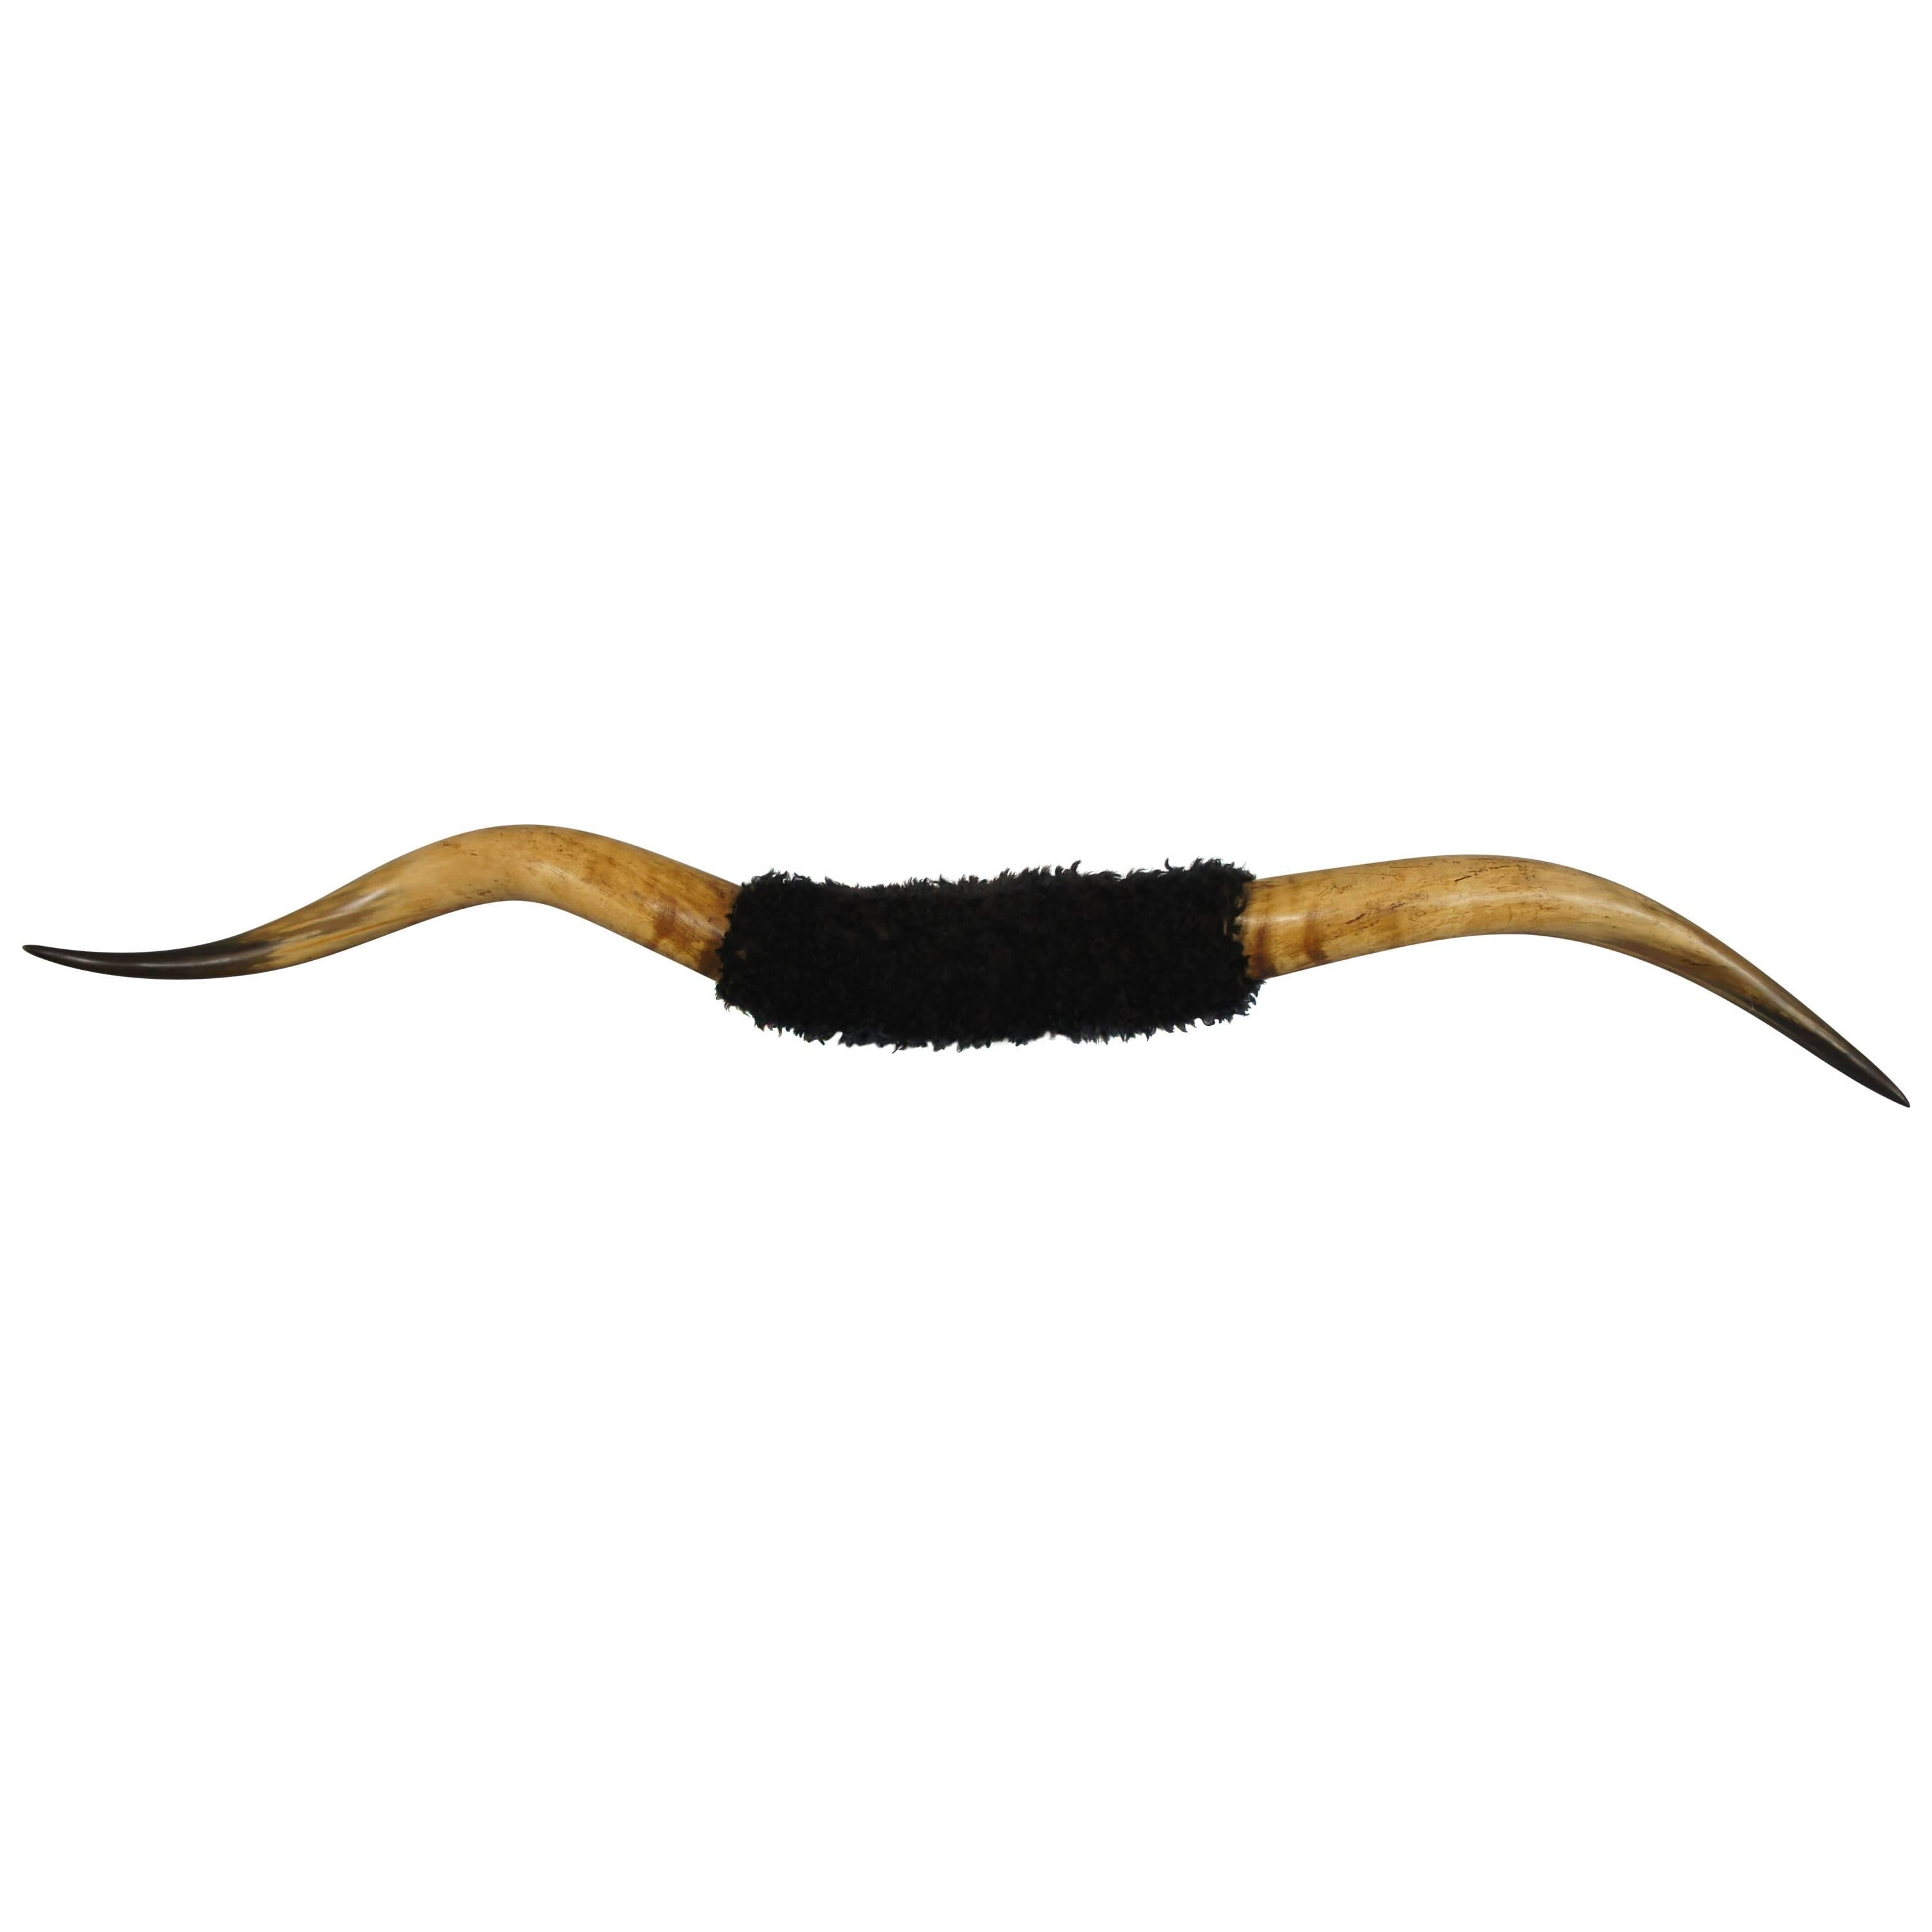 Taxidermy Mounted Longhorn Steer Horns For Sale